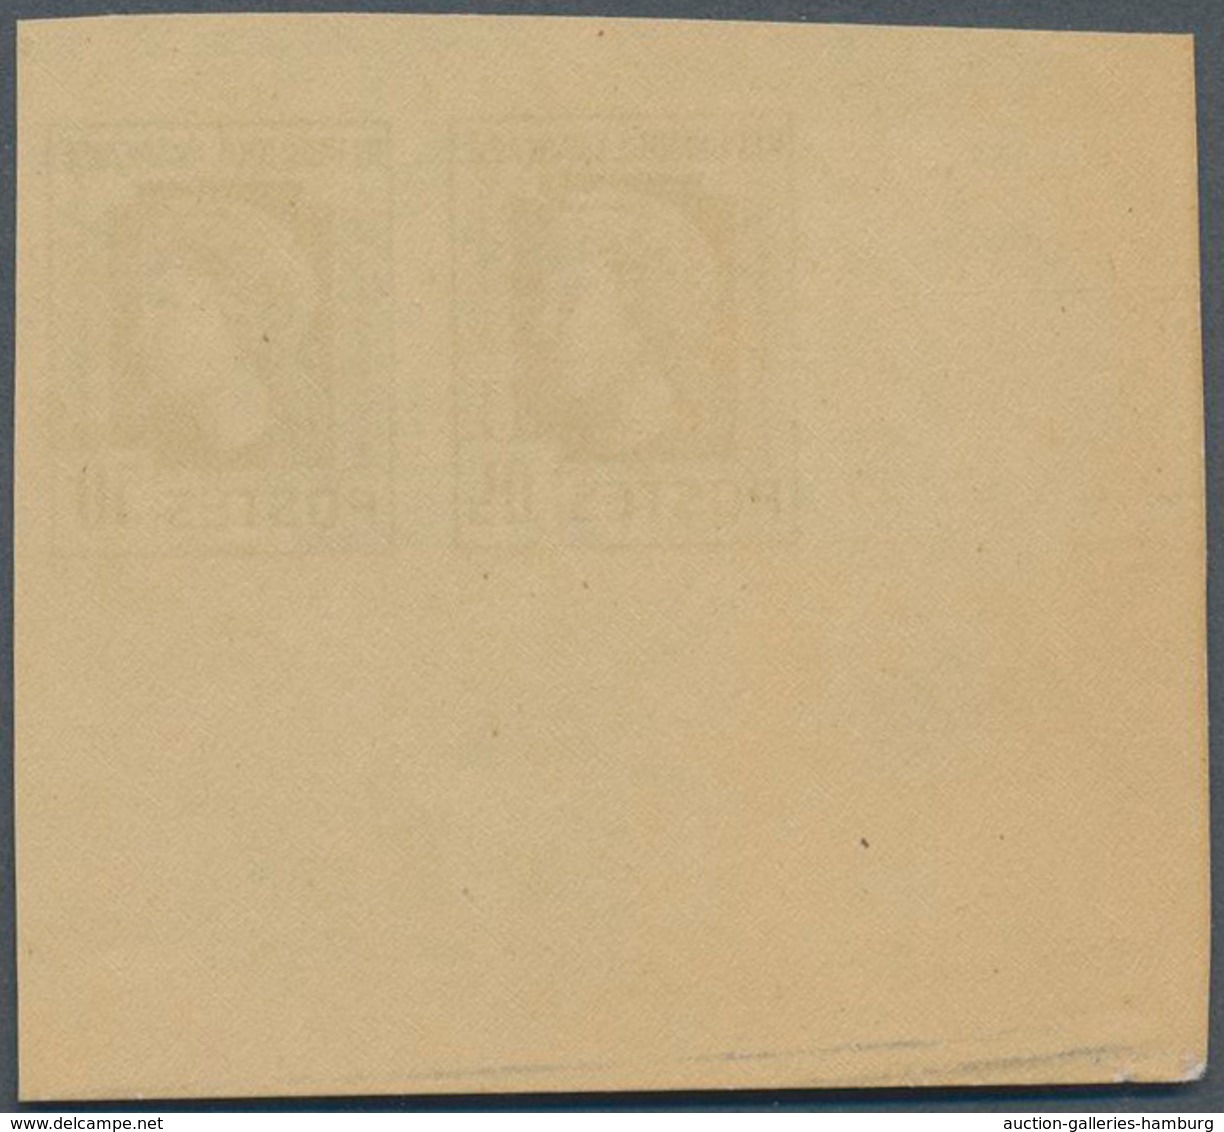 Frankreich: 1944, Definitives "Marianne", Not Issued, Imperforate Essay 50fr. Grey As Horizontal Pai - Used Stamps